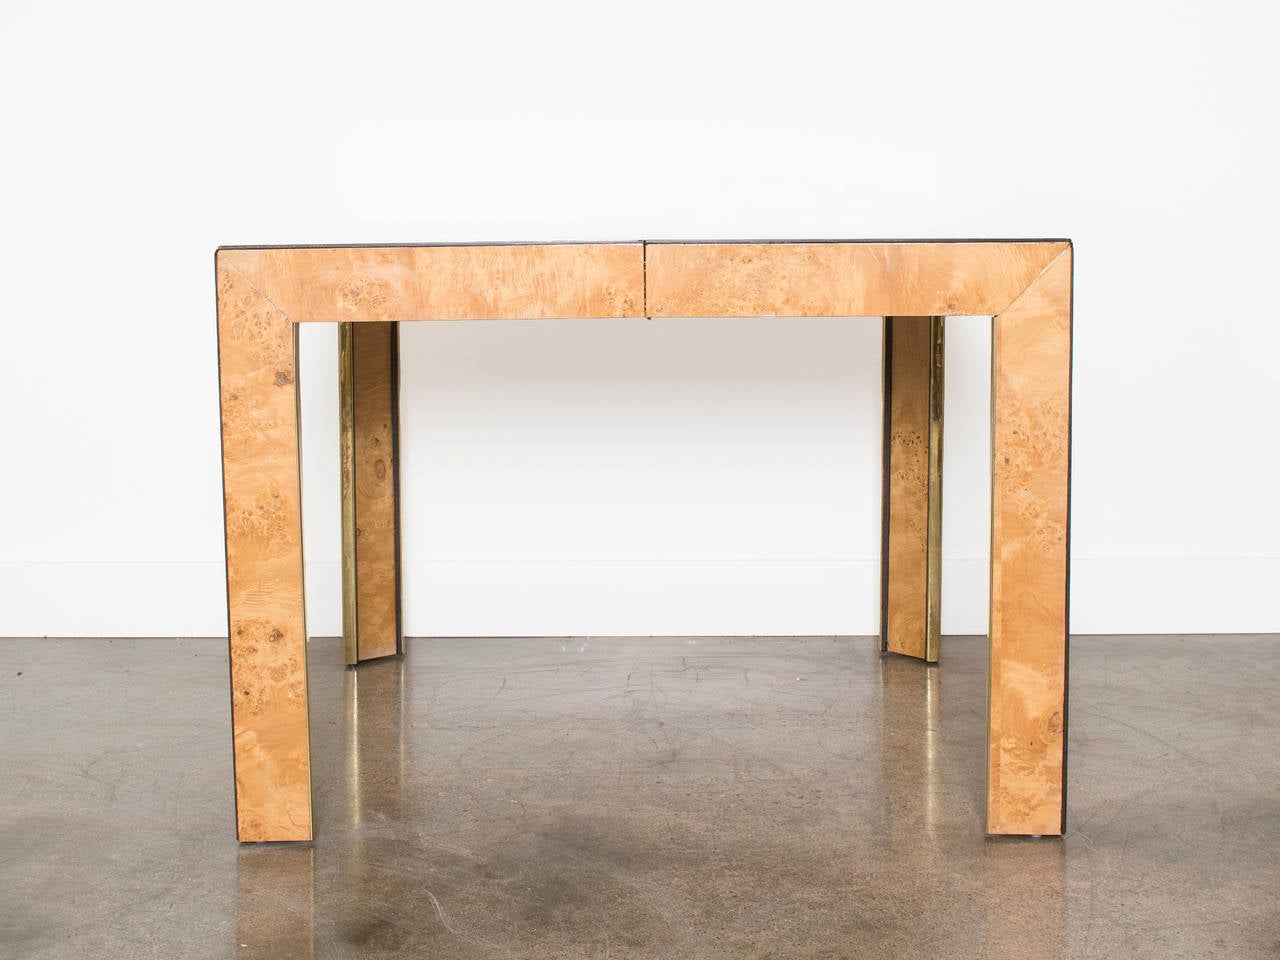 Burl Wood Parsons dining table by Thomasville - in the style of Milo Baughman - with brass detailing. With two 20